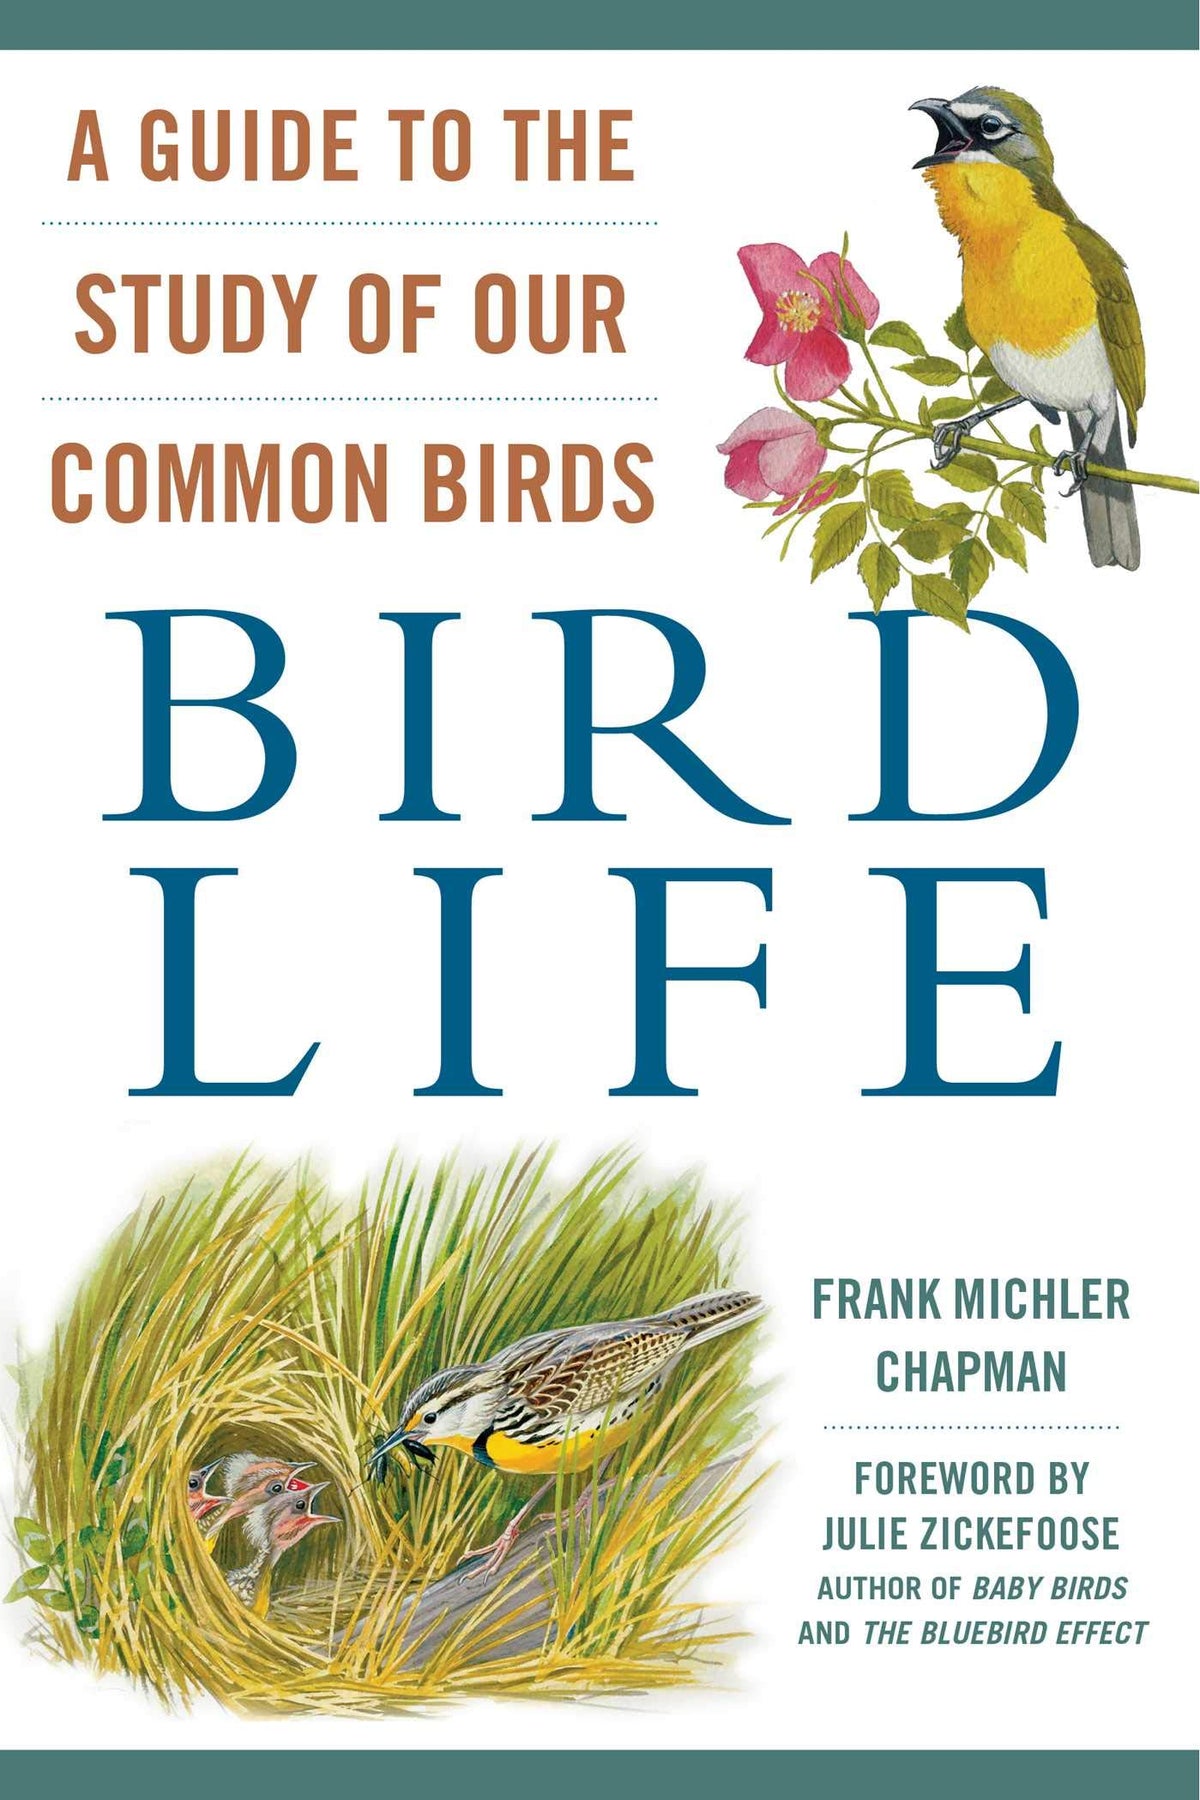 The Guide To The Study Of Our Common Birds- Bird Life